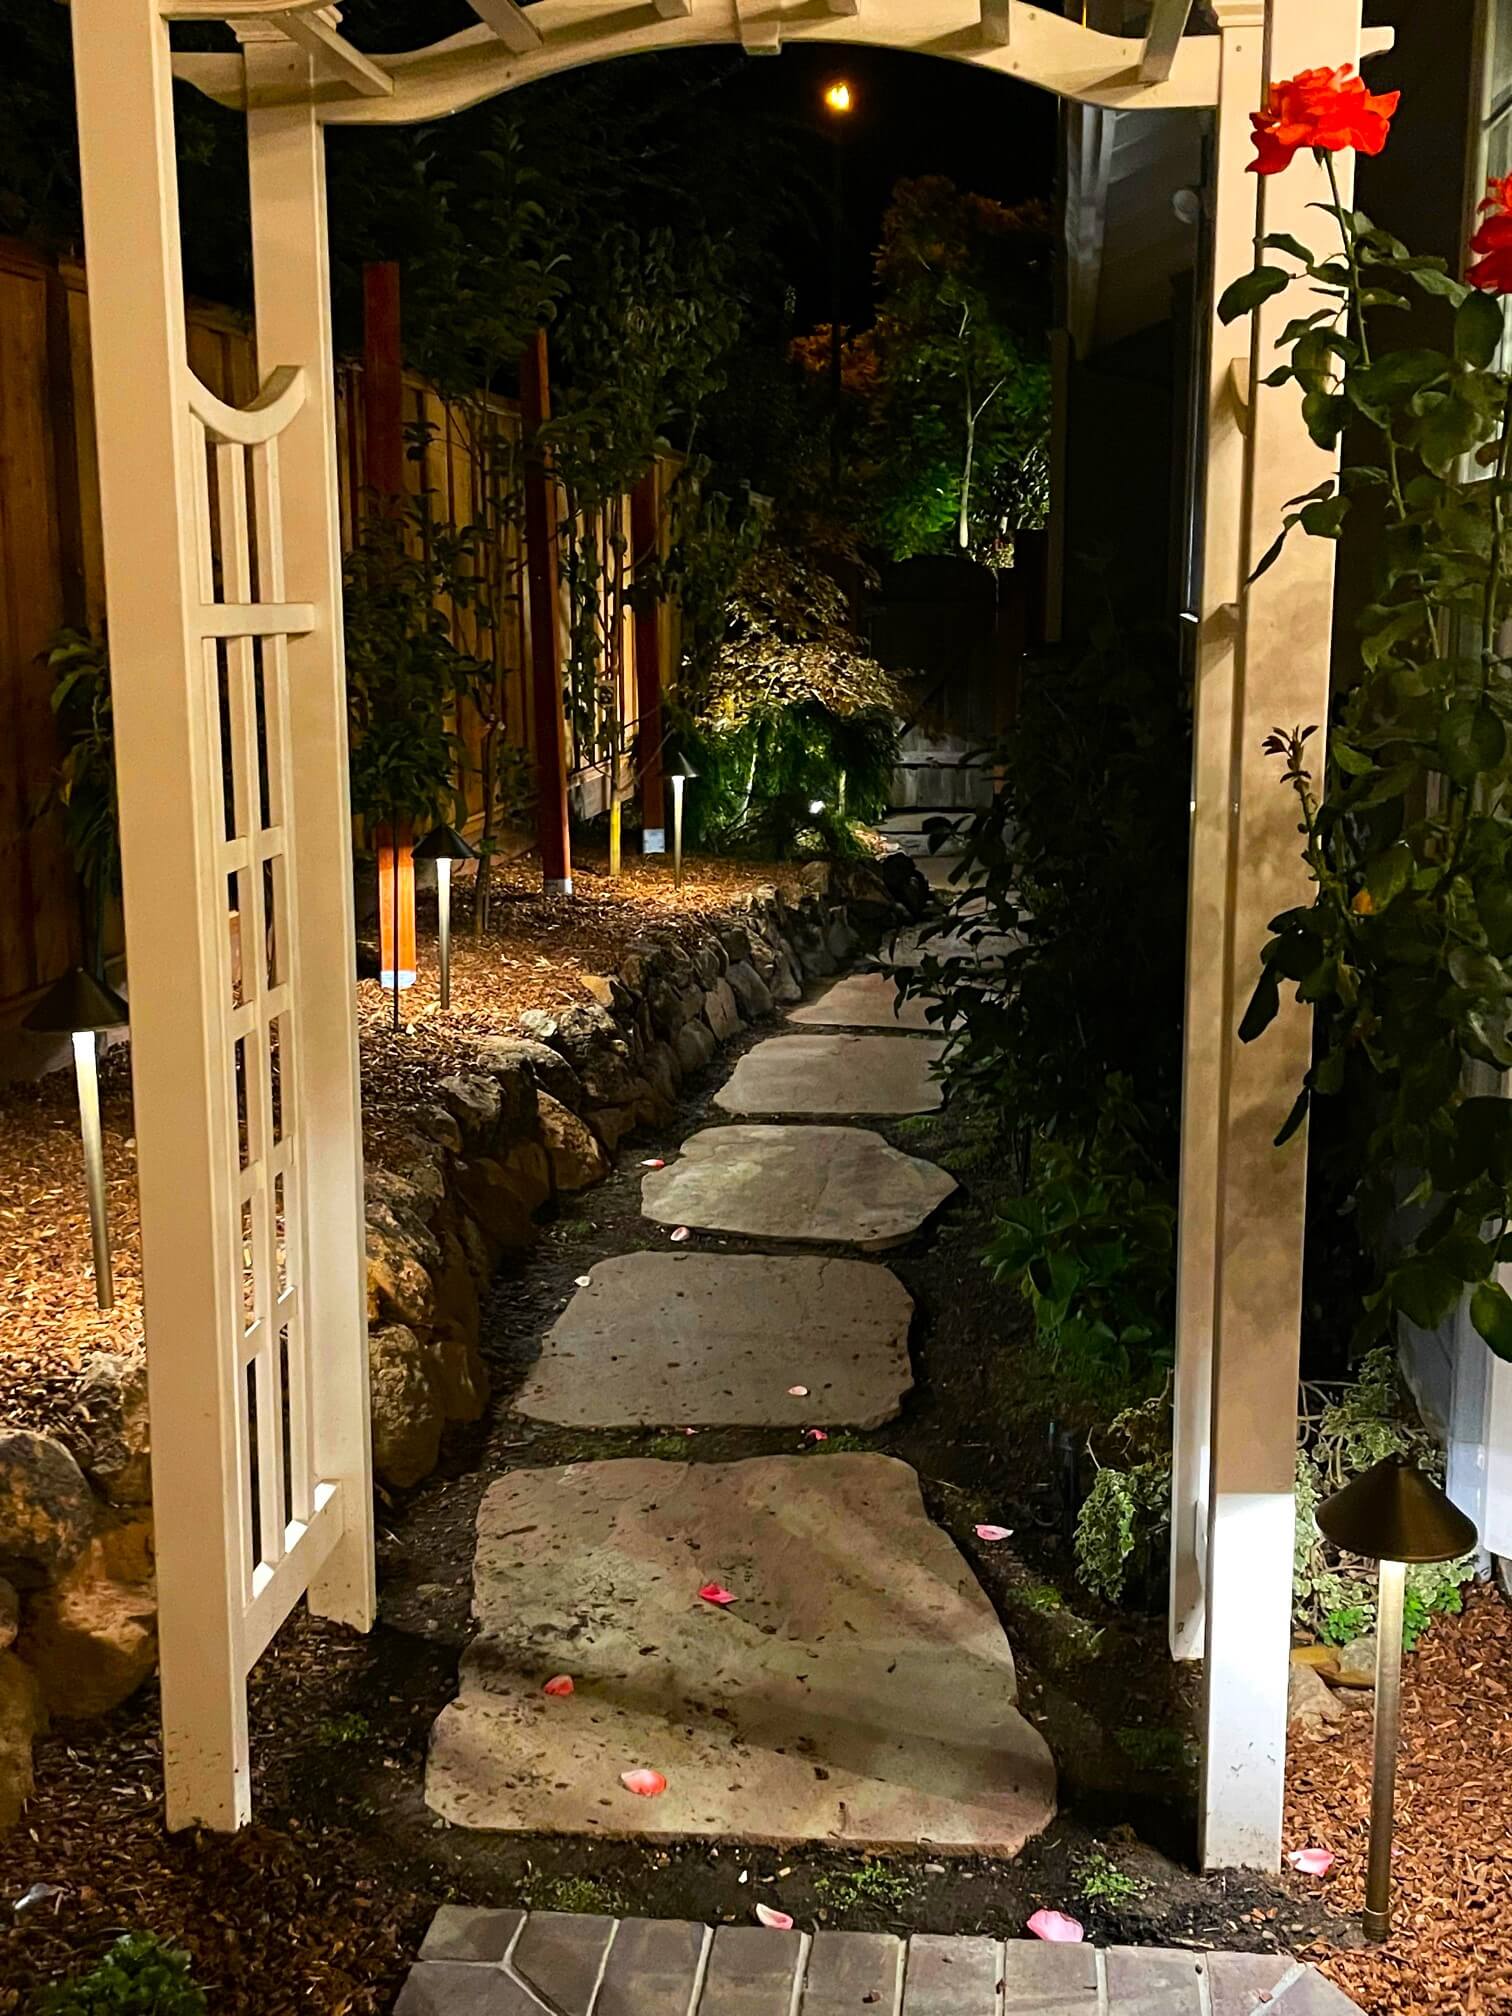 Rugged large stone paver pathway down side yard at night